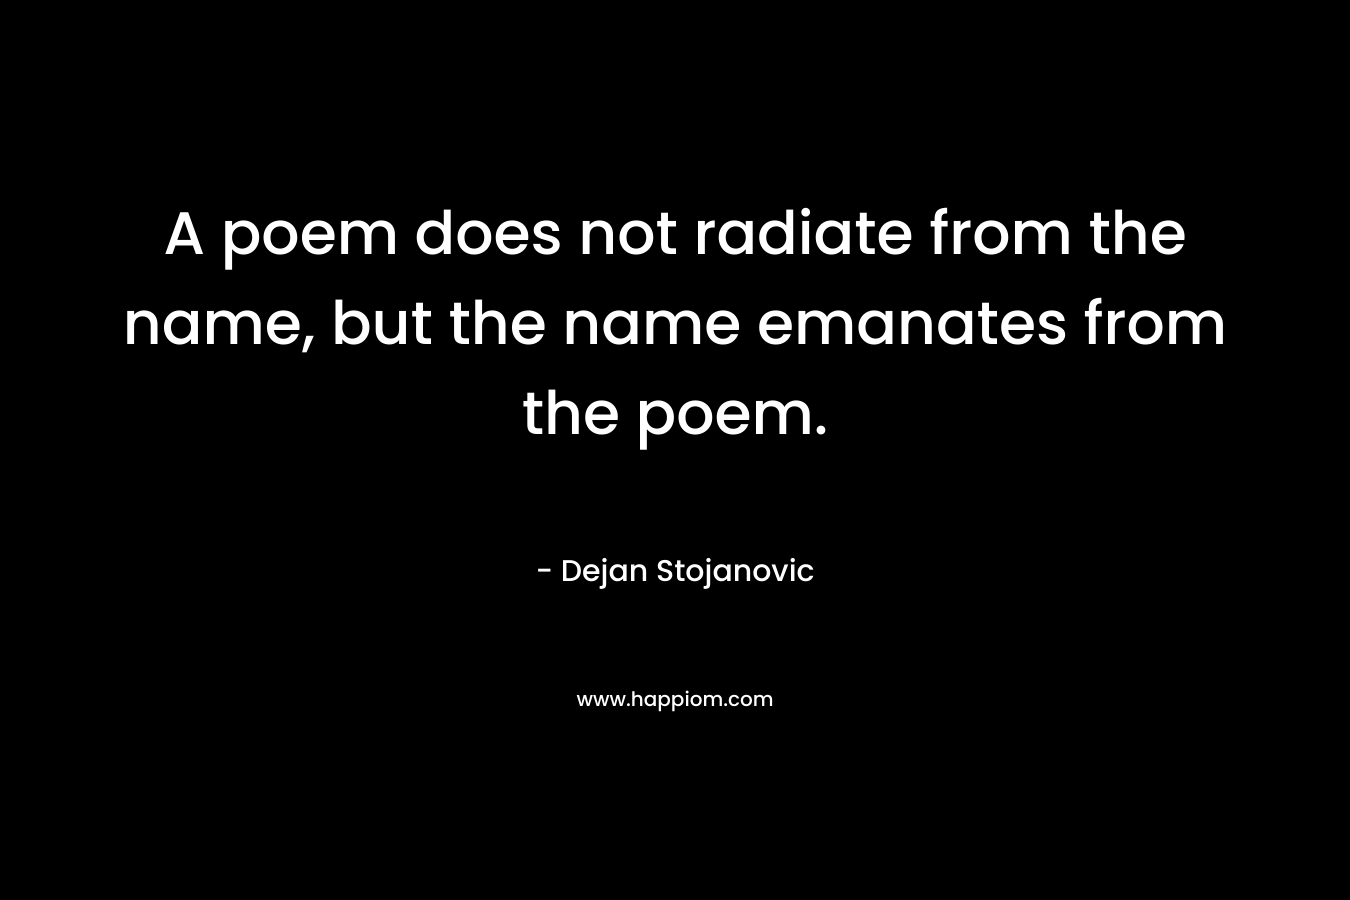 A poem does not radiate from the name, but the name emanates from the poem. – Dejan Stojanovic